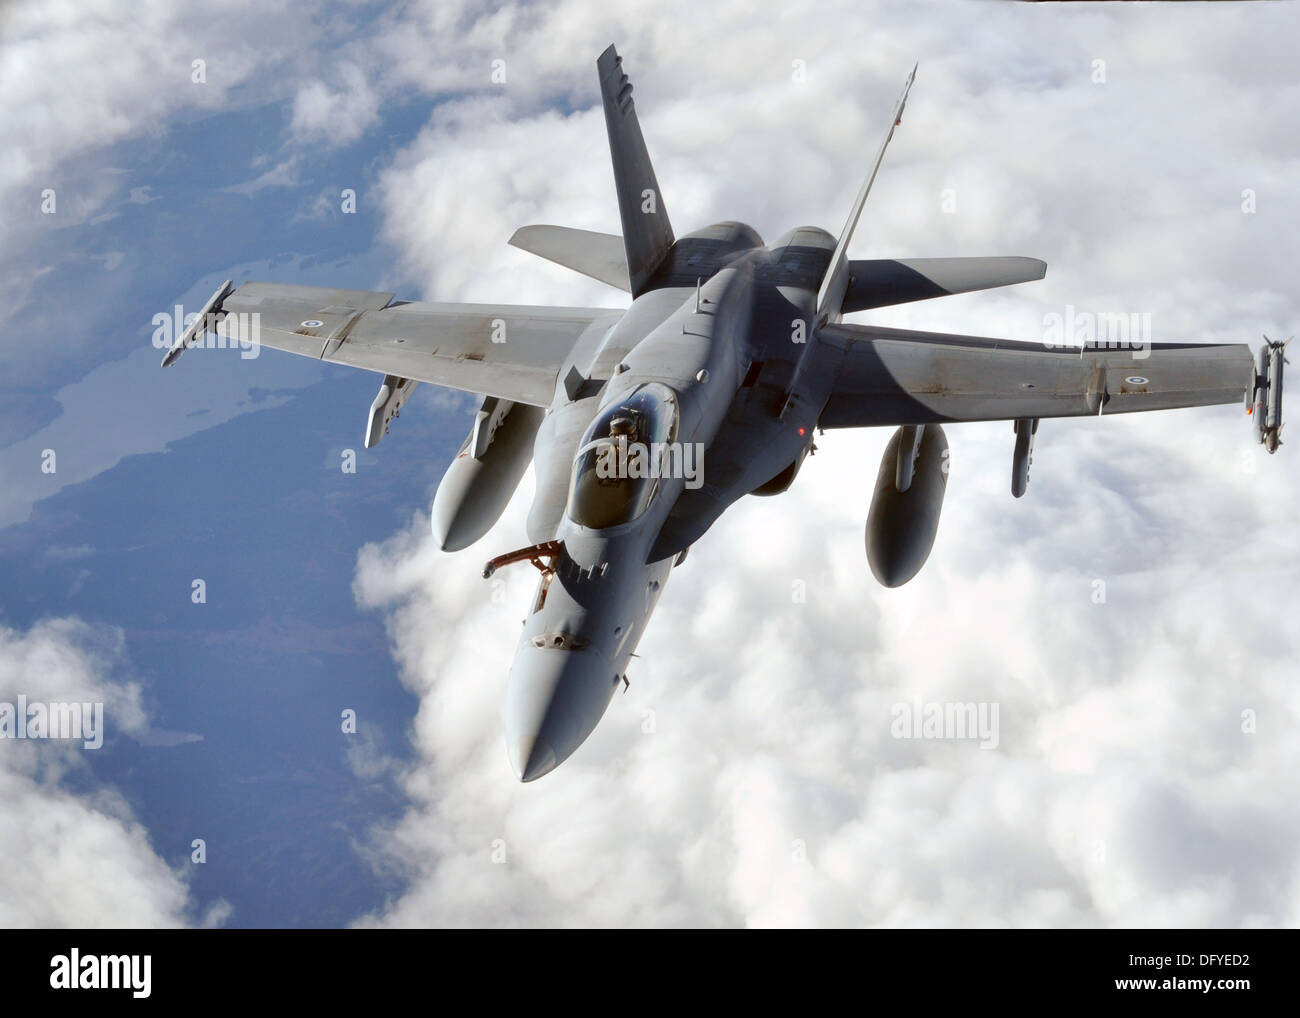 A Finnish F-18 Hornet fighter aircraft during the Arctic Challenge exercise September 24, 2013 over Norway. Stock Photo